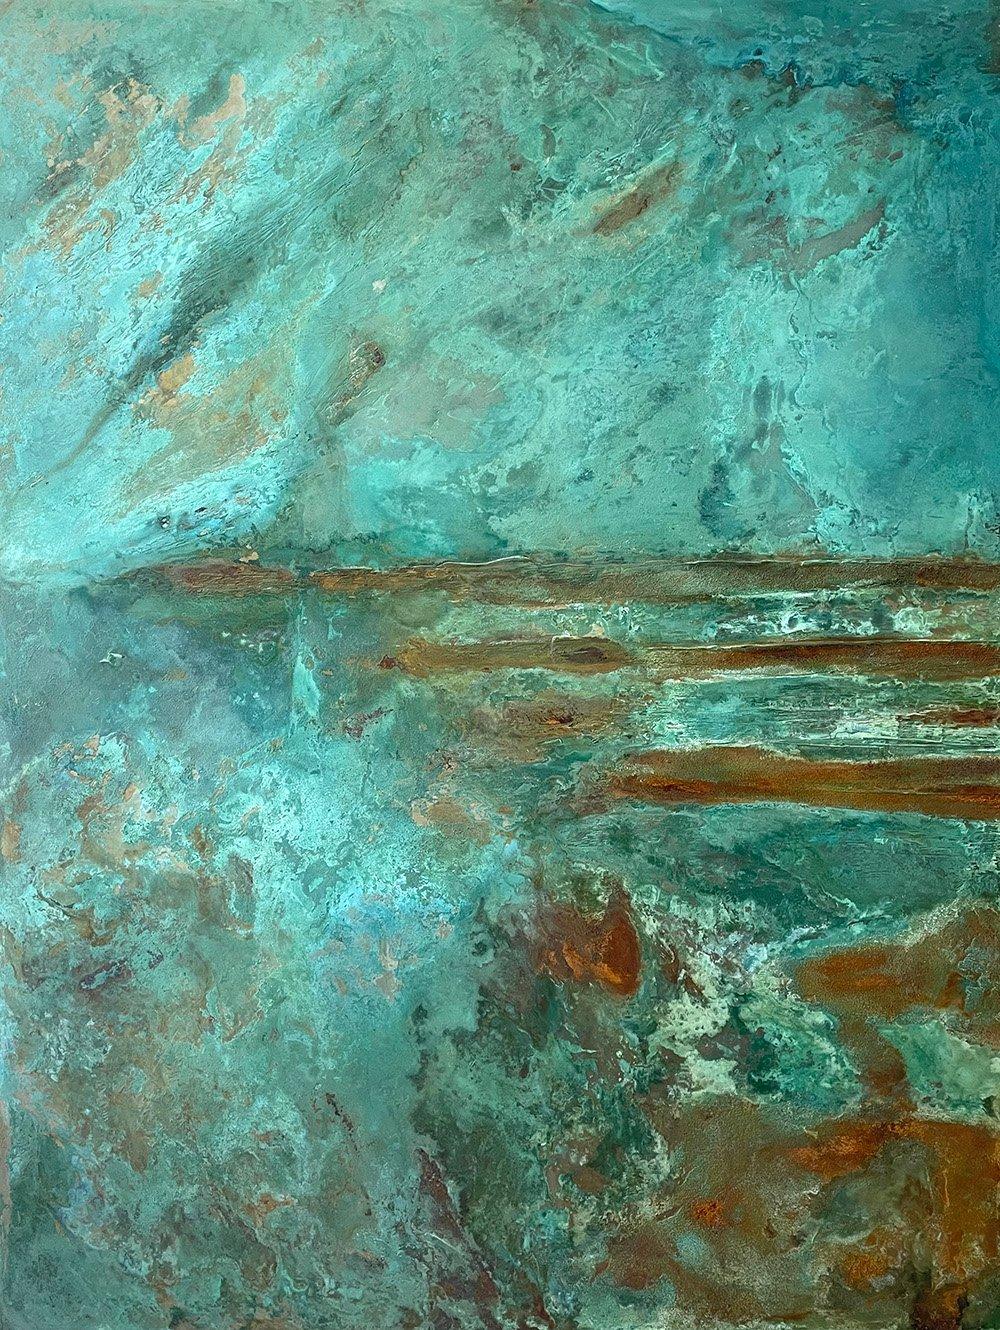 All the Sun on the Sea II is a unique painting by French contemporary artist Frédérique Domergue. This painting is made with oxidized zinc and bronze leaves on aluminium panel, patina fixed with beeswax, dimensions are 180 × 140 cm (70.9 × 55.1